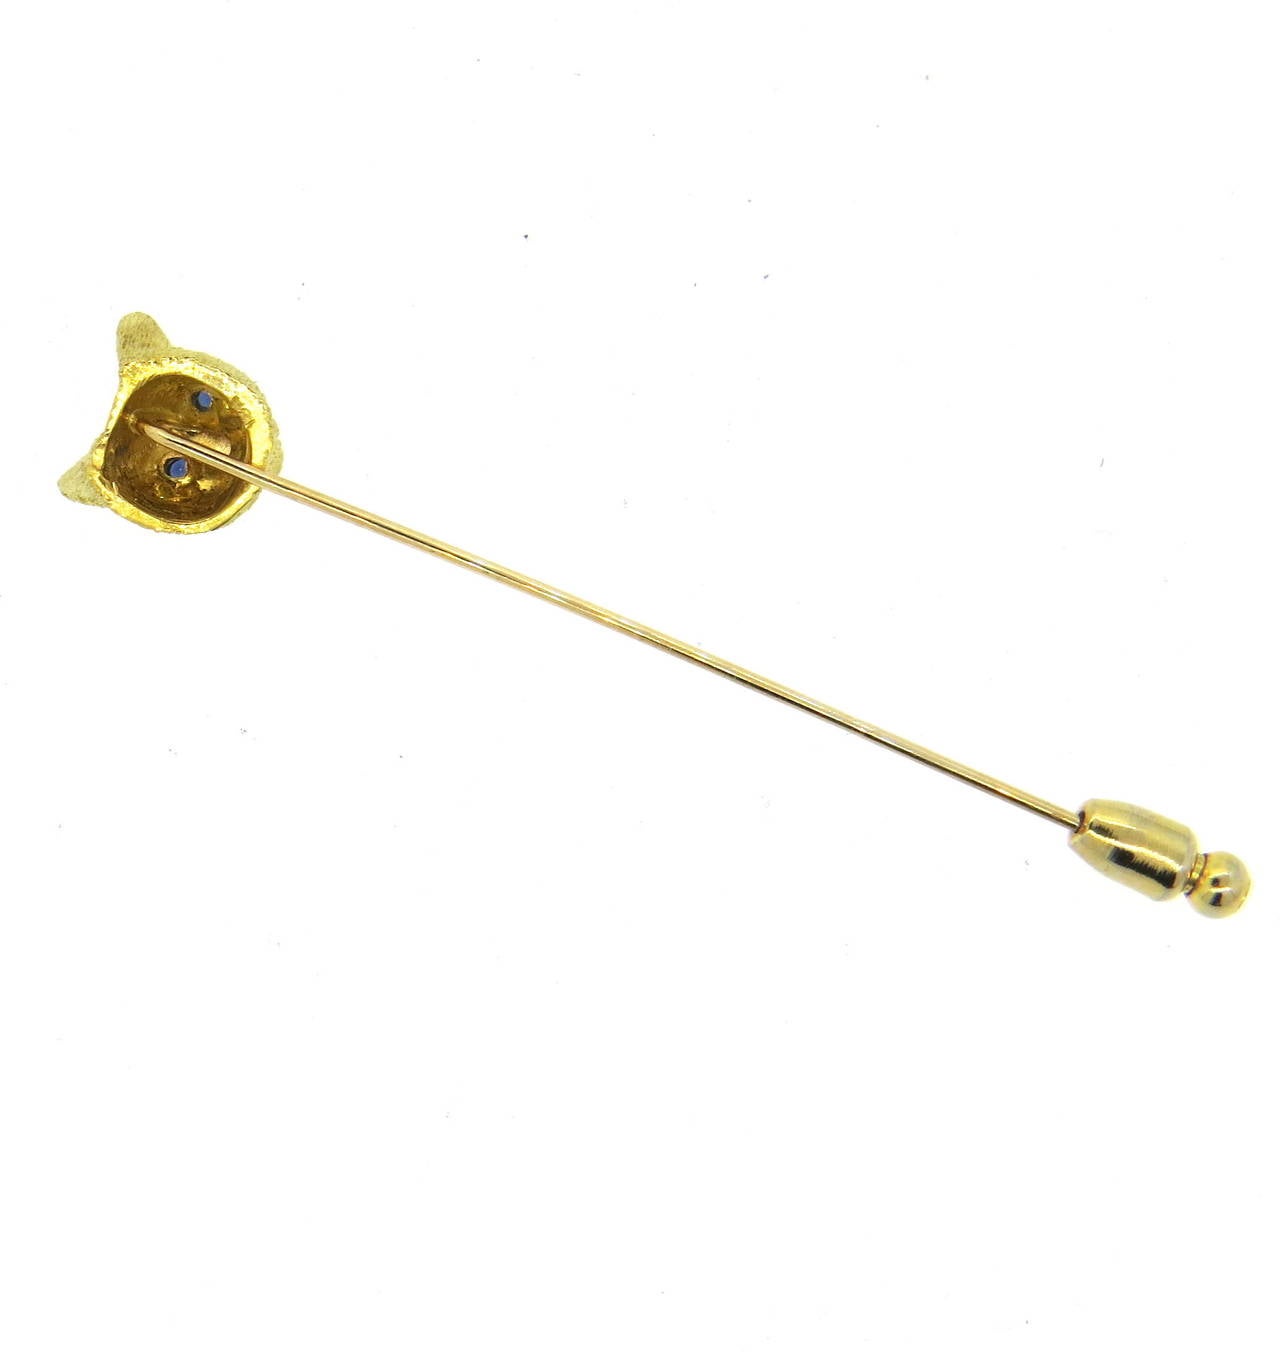 An 18k yellow gold stick pin depicting a cat with sapphire eyes.  The pin measures 10.6mm x 10.5mm and weighs 4.0 grams.